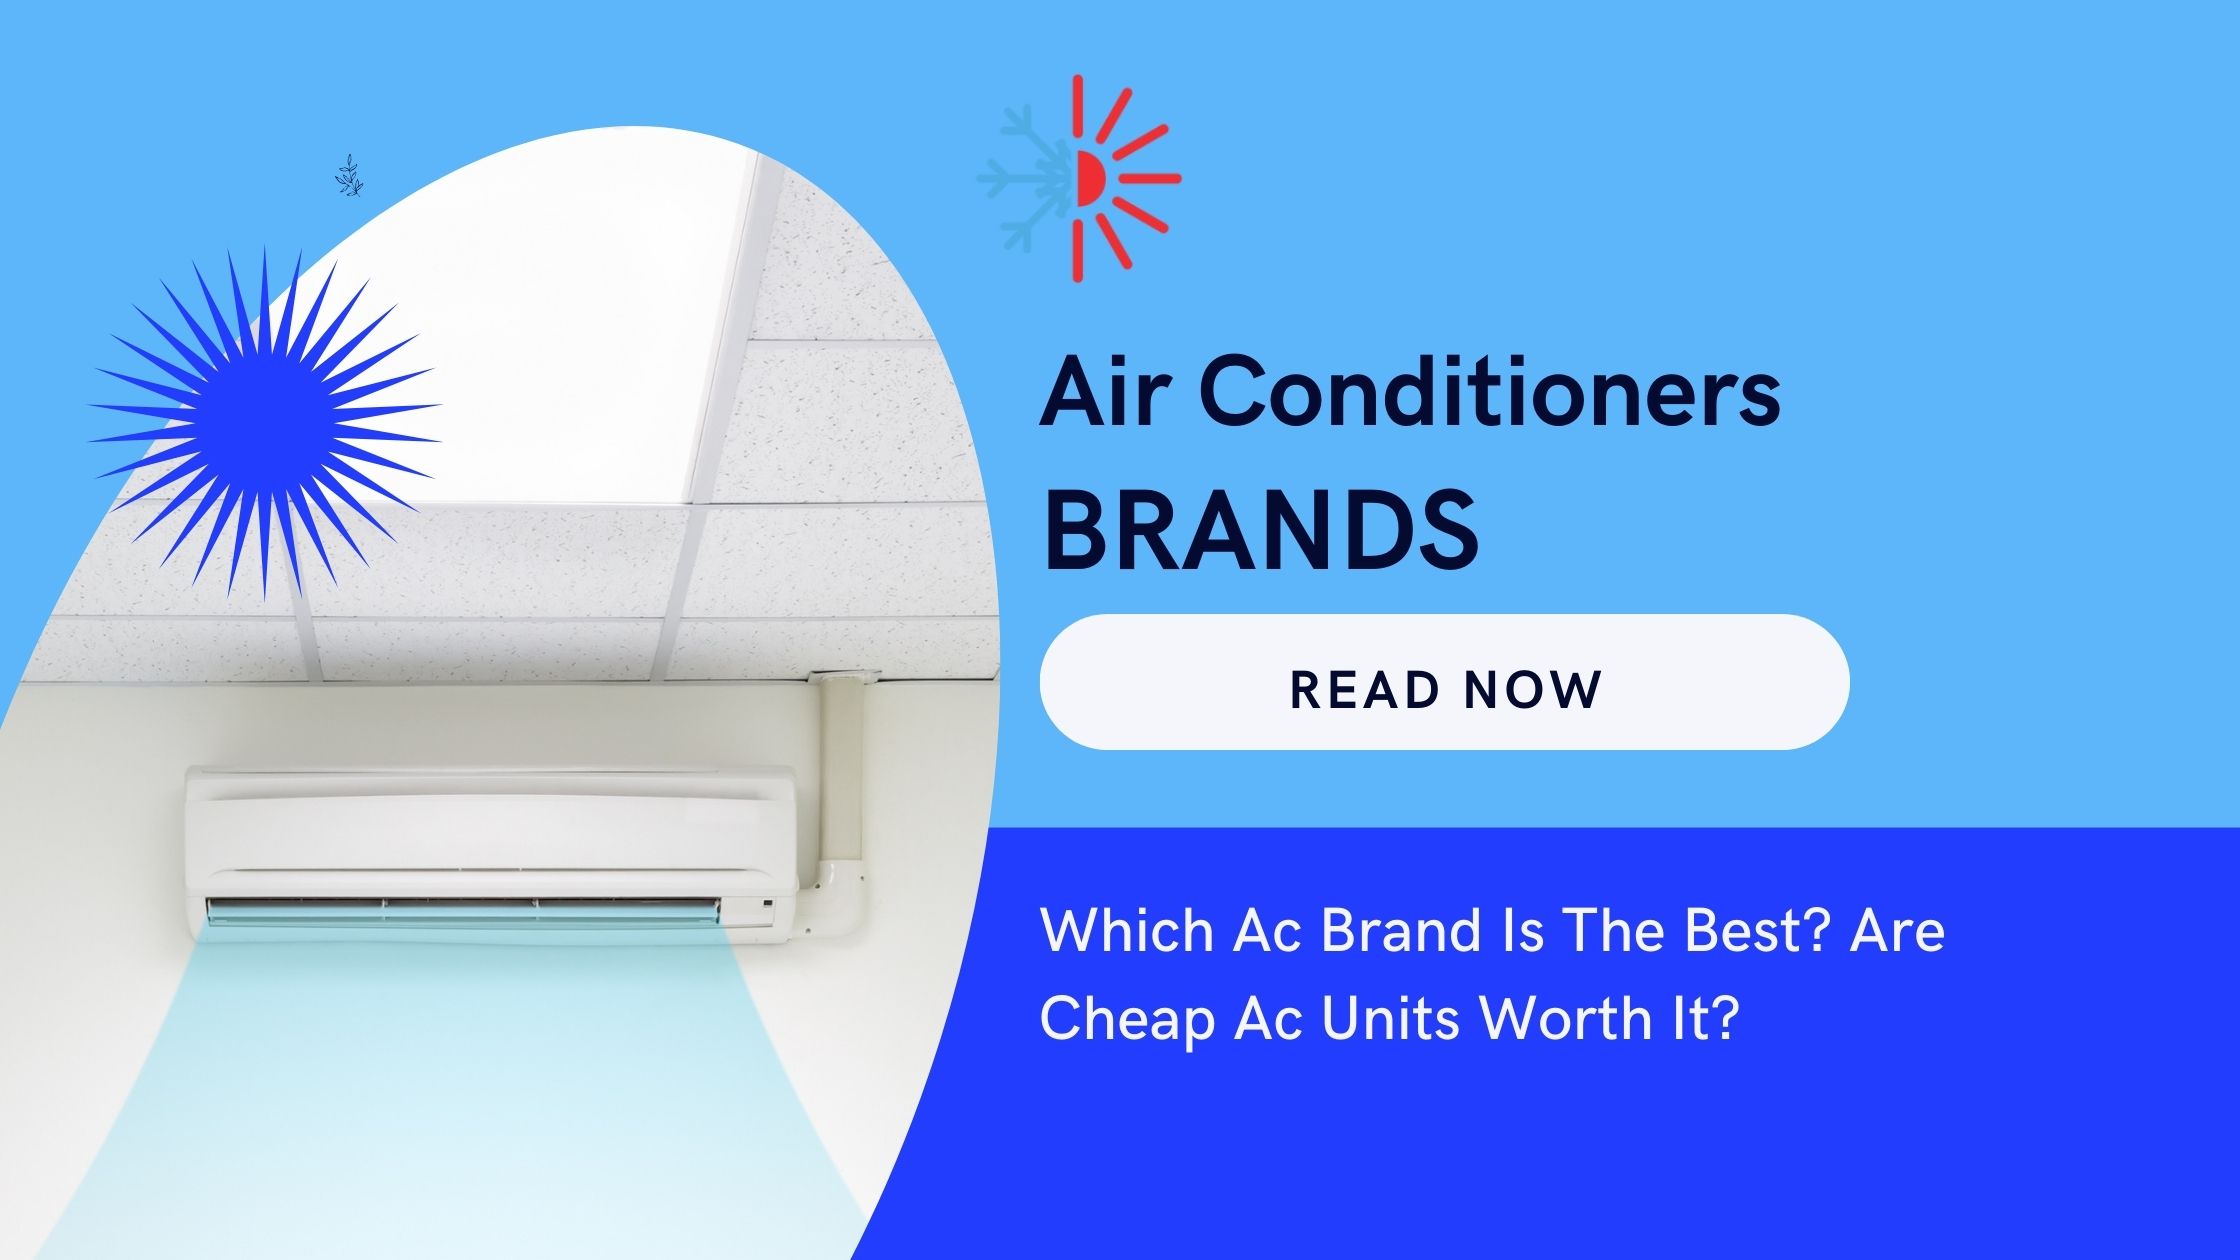 Which Ac Brand Is The Best_ Are Cheap Ac Units Worth It